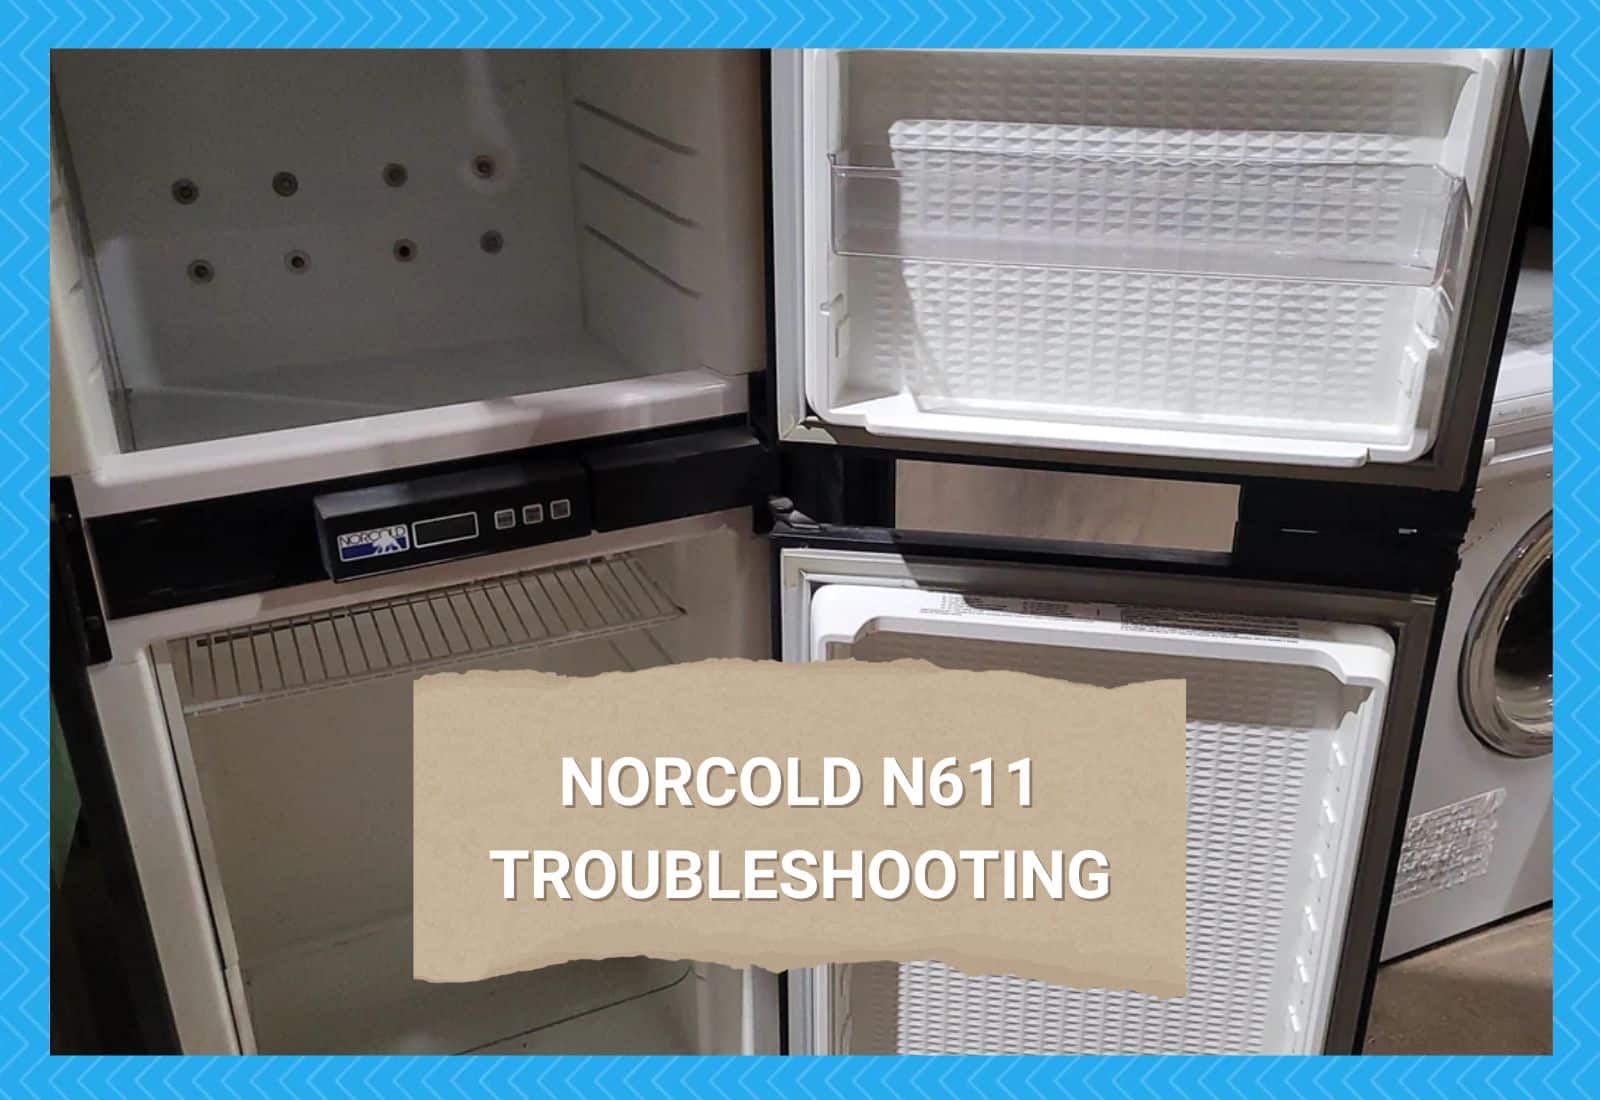 Norcold N611 Troubleshooting